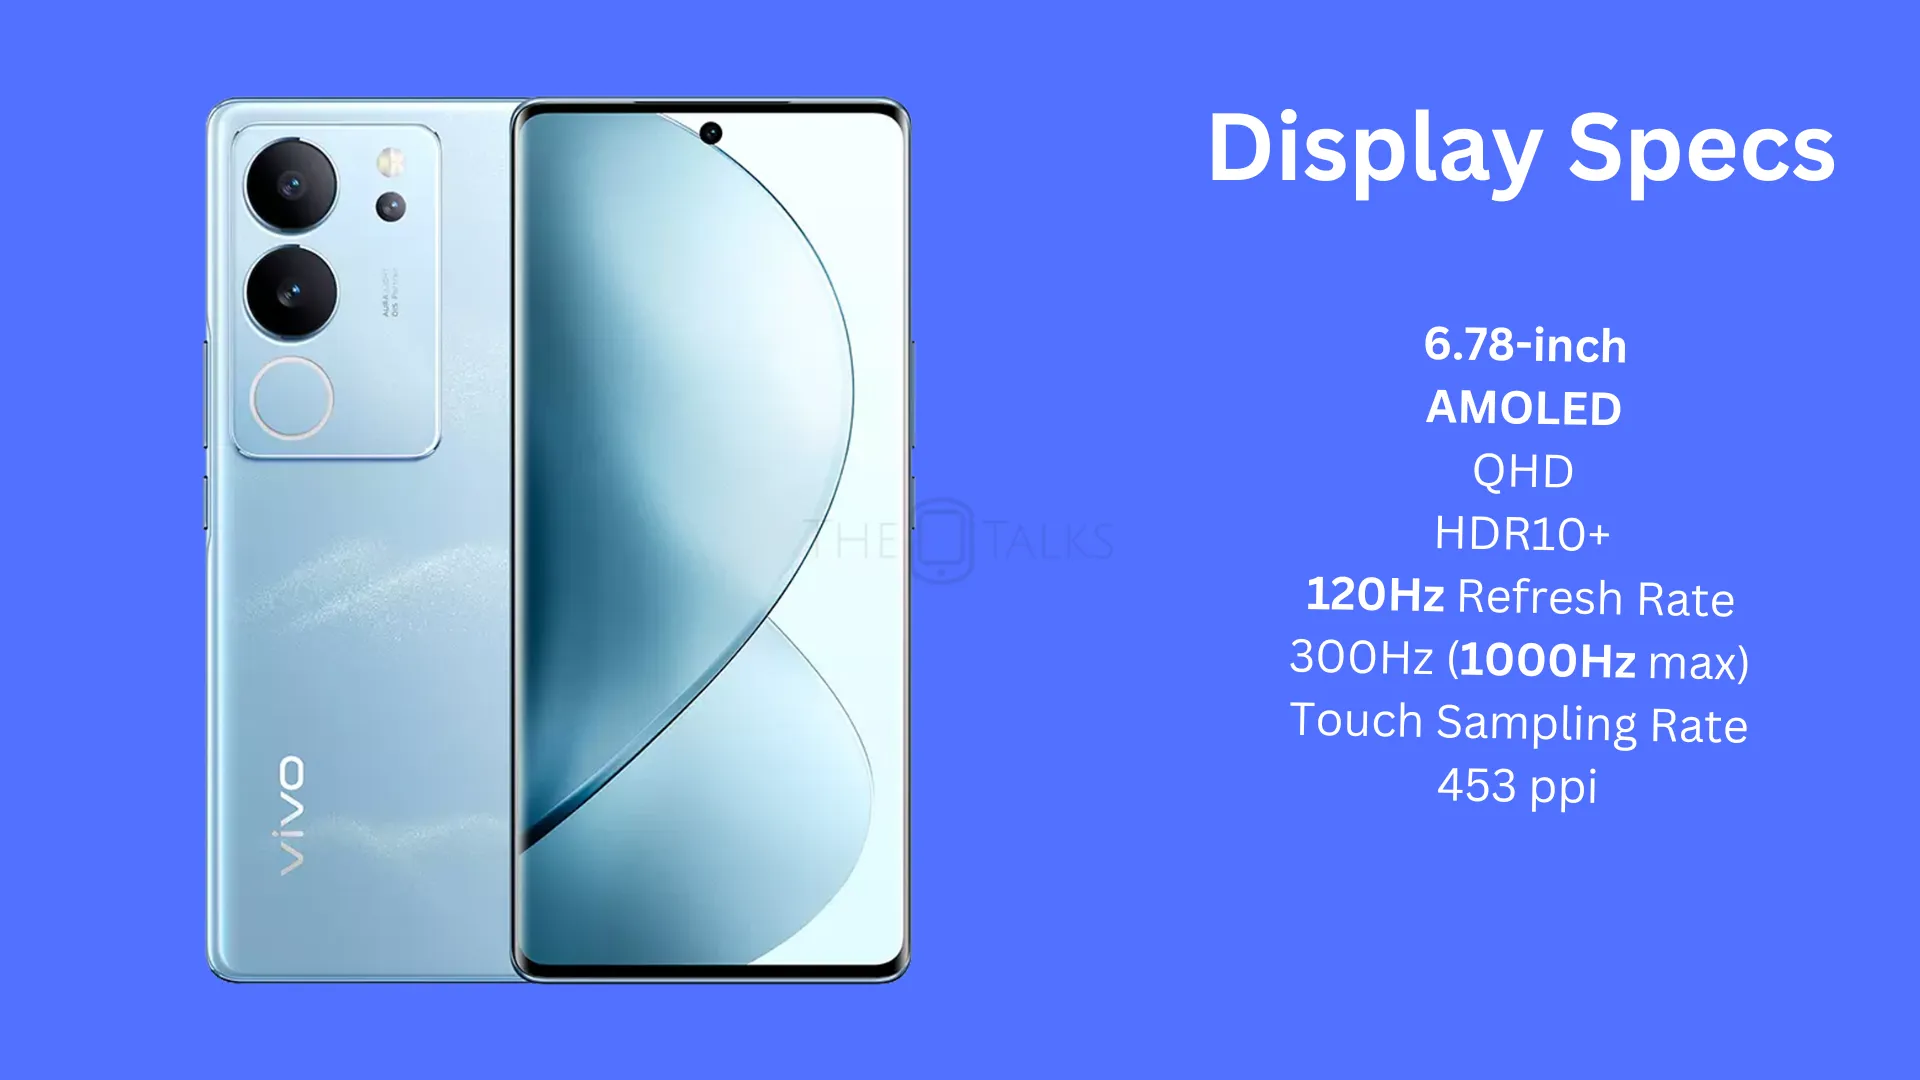 All The Best Phones With 120Hz Display - vivo V29